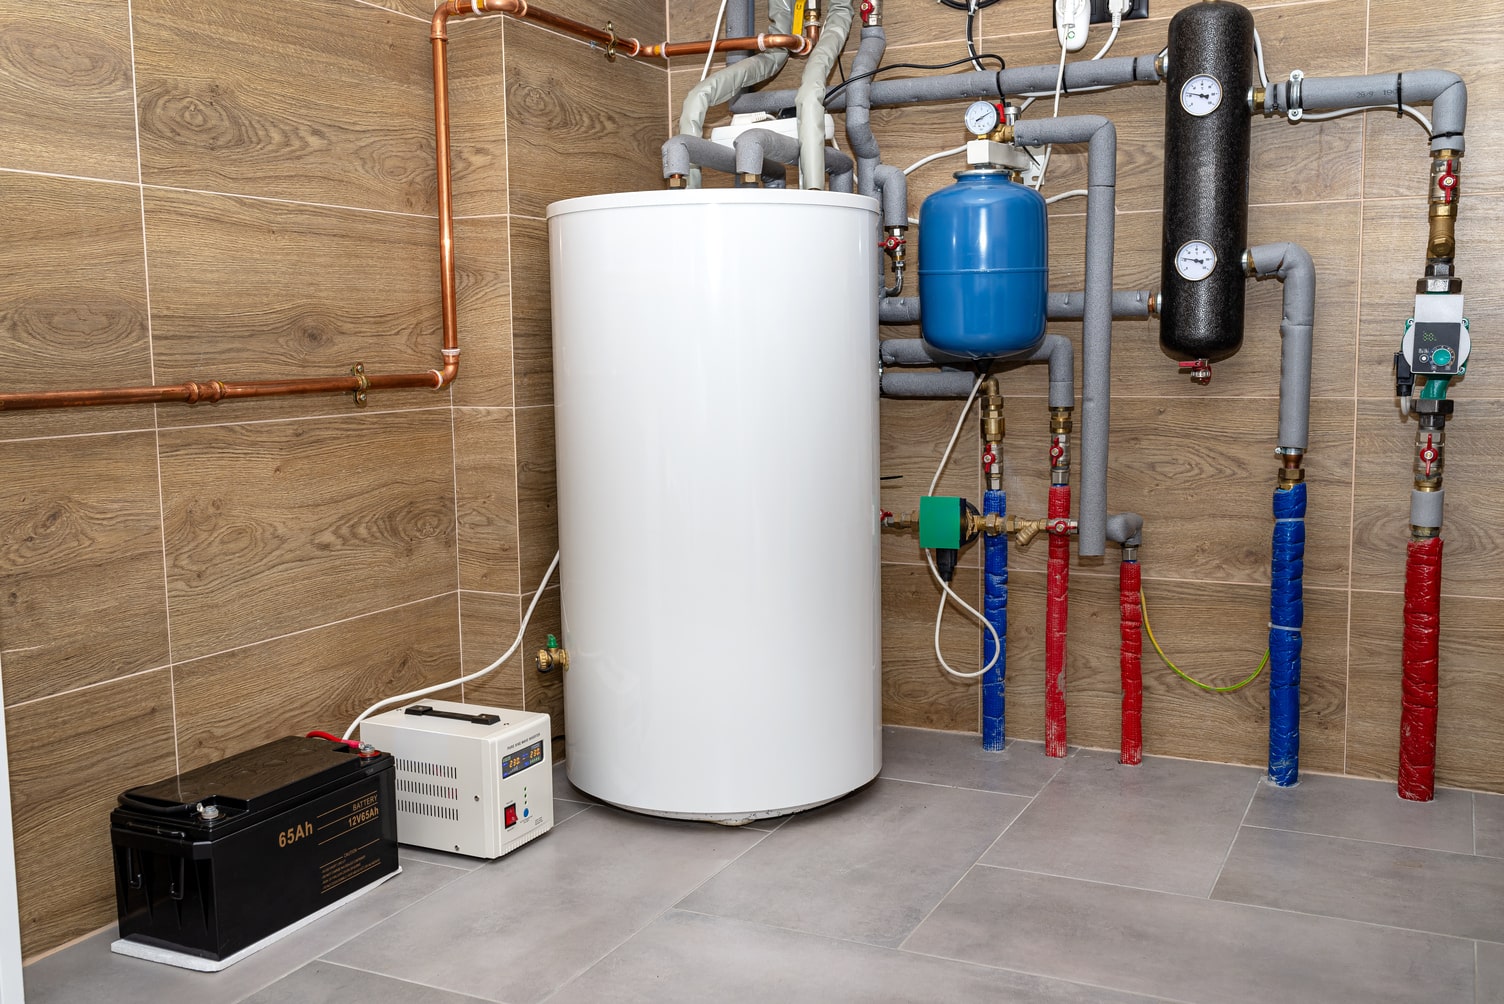 Modern home water heating system with boiler and piping.